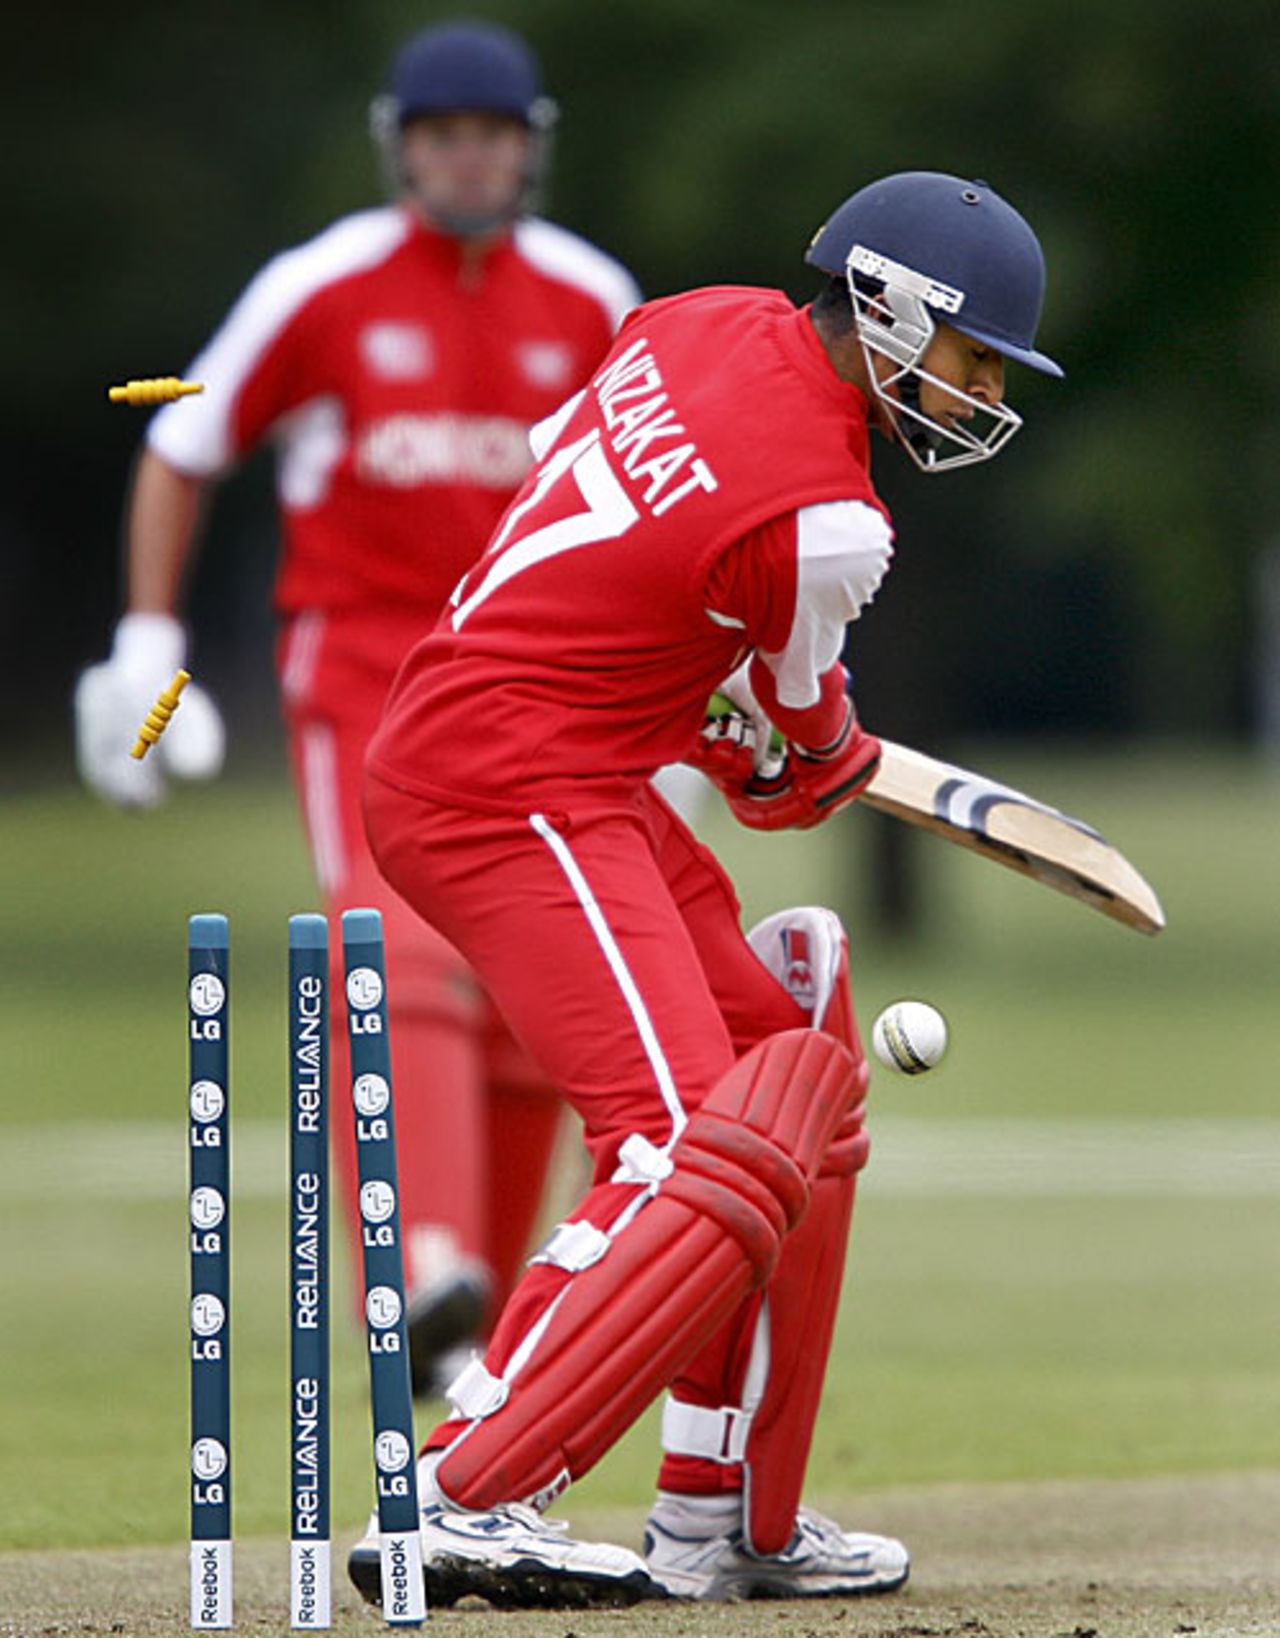 Nizakat Khan is bowled by Sandeep Sharma, India Under-19s v Hong Kong Under-19s, 11th Match, Group A, ICC Under-19 World Cup, Christchurch, January 17, 2010